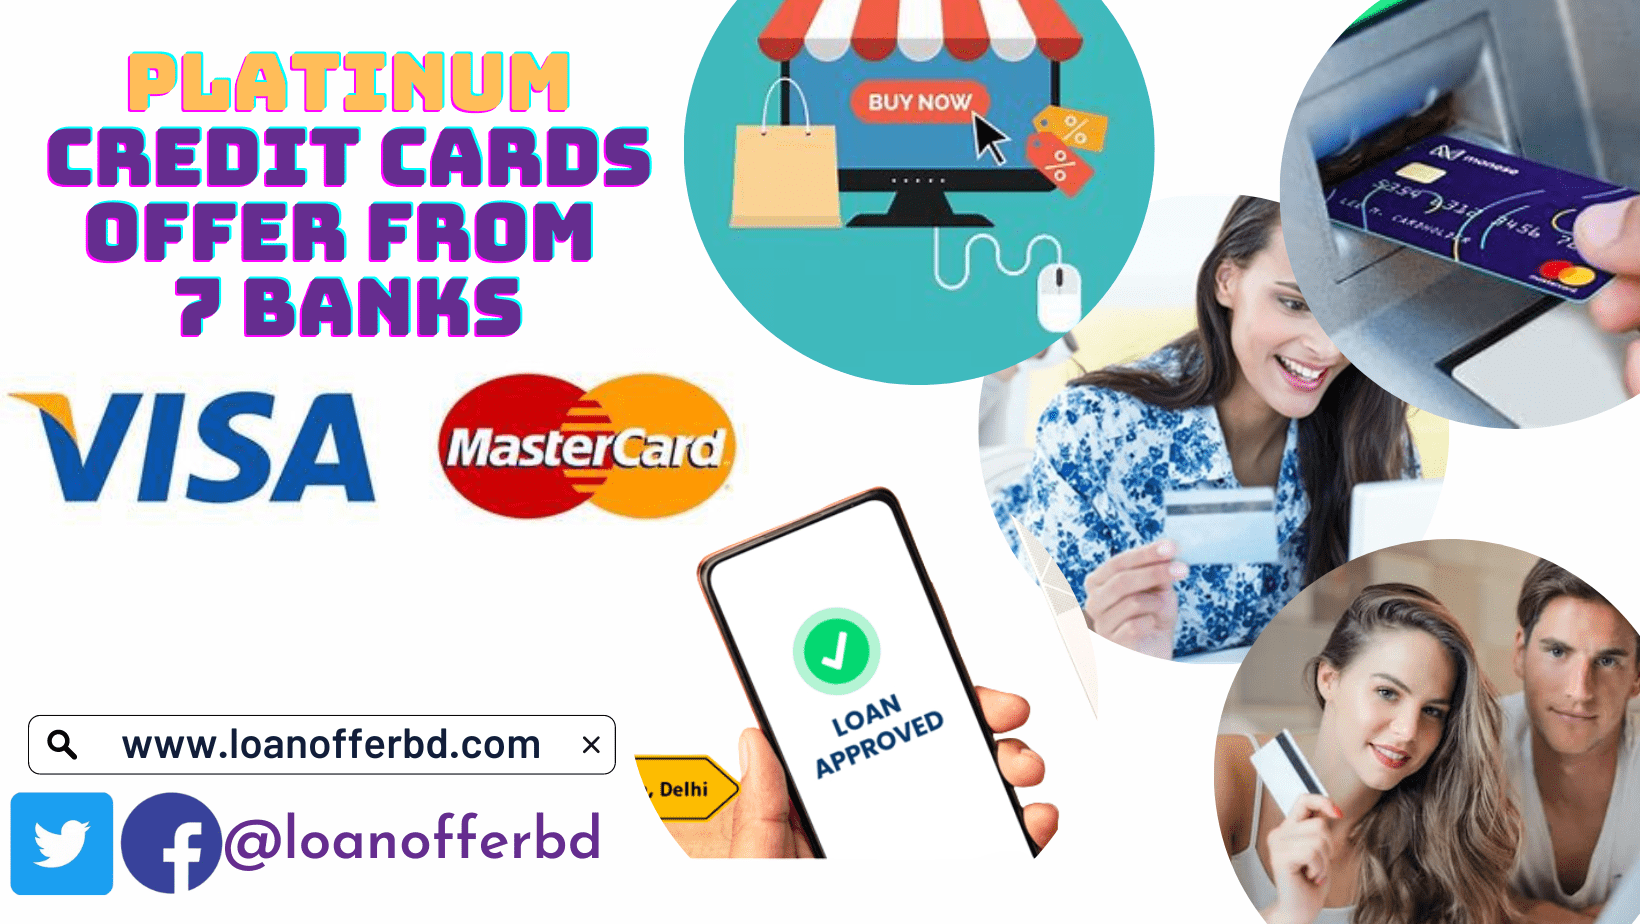 Platinum-credit-card-from-7-banks-loanofferbd